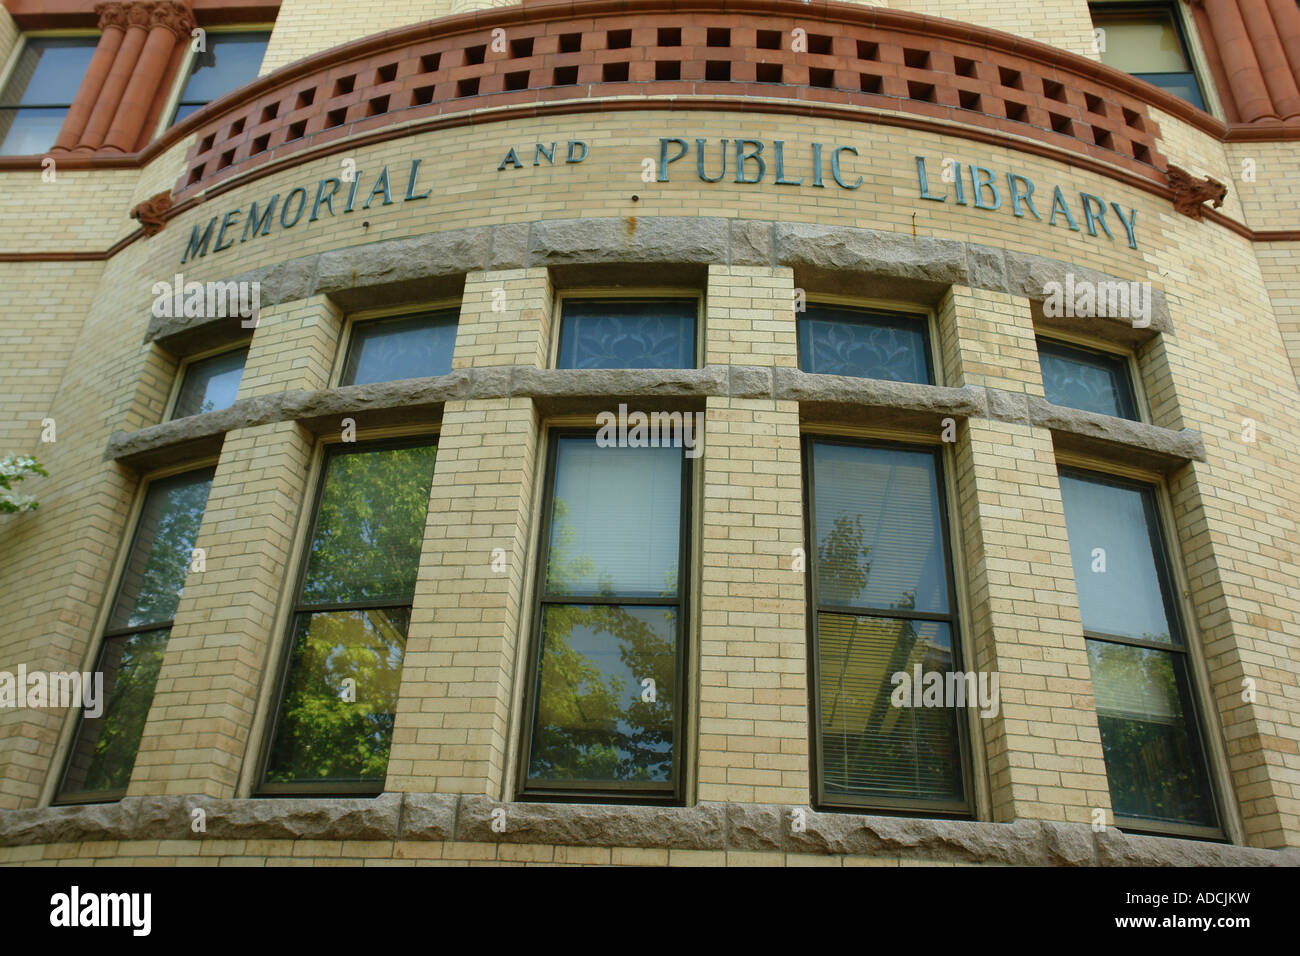 AJD58364, Westerly, RI, Rhode Island, Memorial and Public Library, downtown Stock Photo